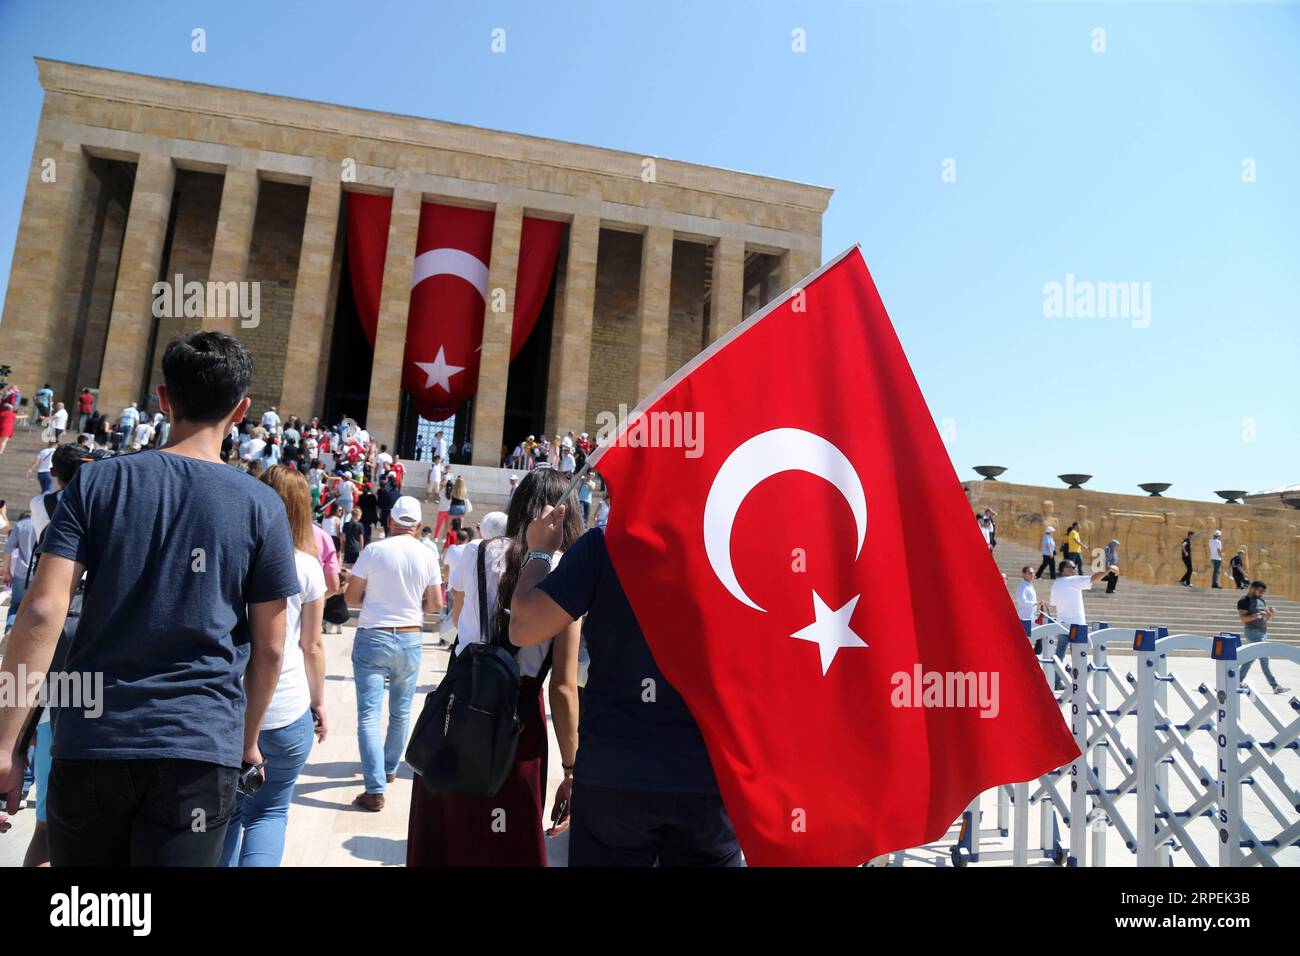 (190830) -- ANKARA, Aug. 30, 2019 -- The Turks celebrate the 97th anniversary of Victory Day at the Ataturk Mausoleum in Ankara, Turkey, Aug. 30, 2019. Turkey marked on Friday the 97th anniversary of Victory Day, the day the Turks defeated the Greek forces at the Battle of Dumlupinar, the final battle of the Turkish War of Independence in 1922. (Photo by /Xinhua) TURKEY-ANKARA-VICTORY DAY MustafaxKaya PUBLICATIONxNOTxINxCHN Stock Photo